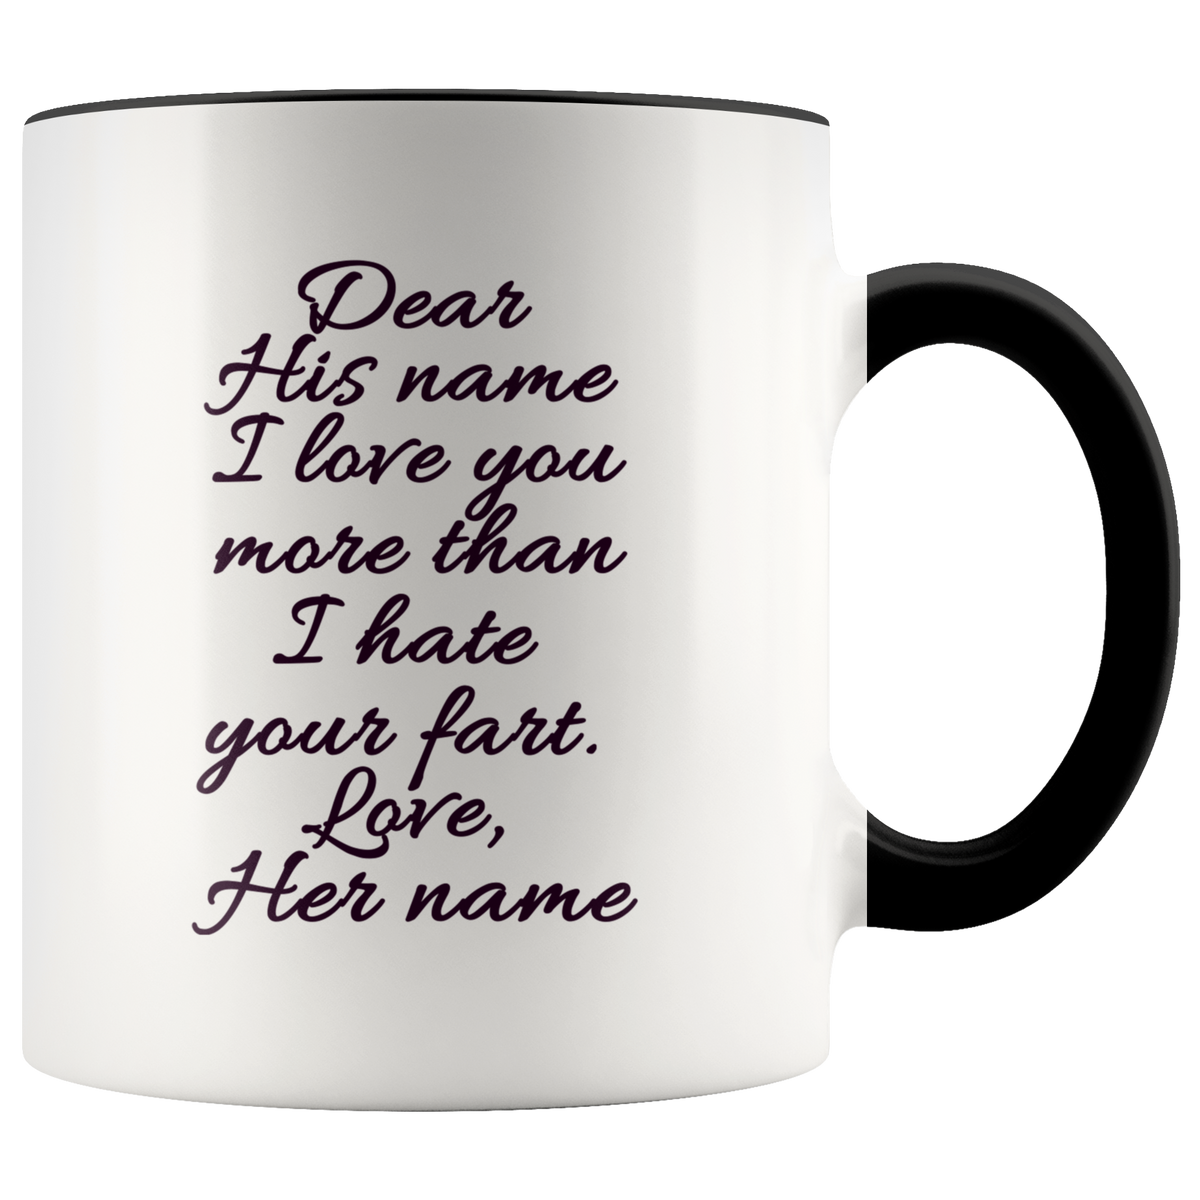 Personalized Funny Mug Gift For Husband Boyfriend - I Love You More Than I Hate Your Fart Accent Coffee Mug 11oz